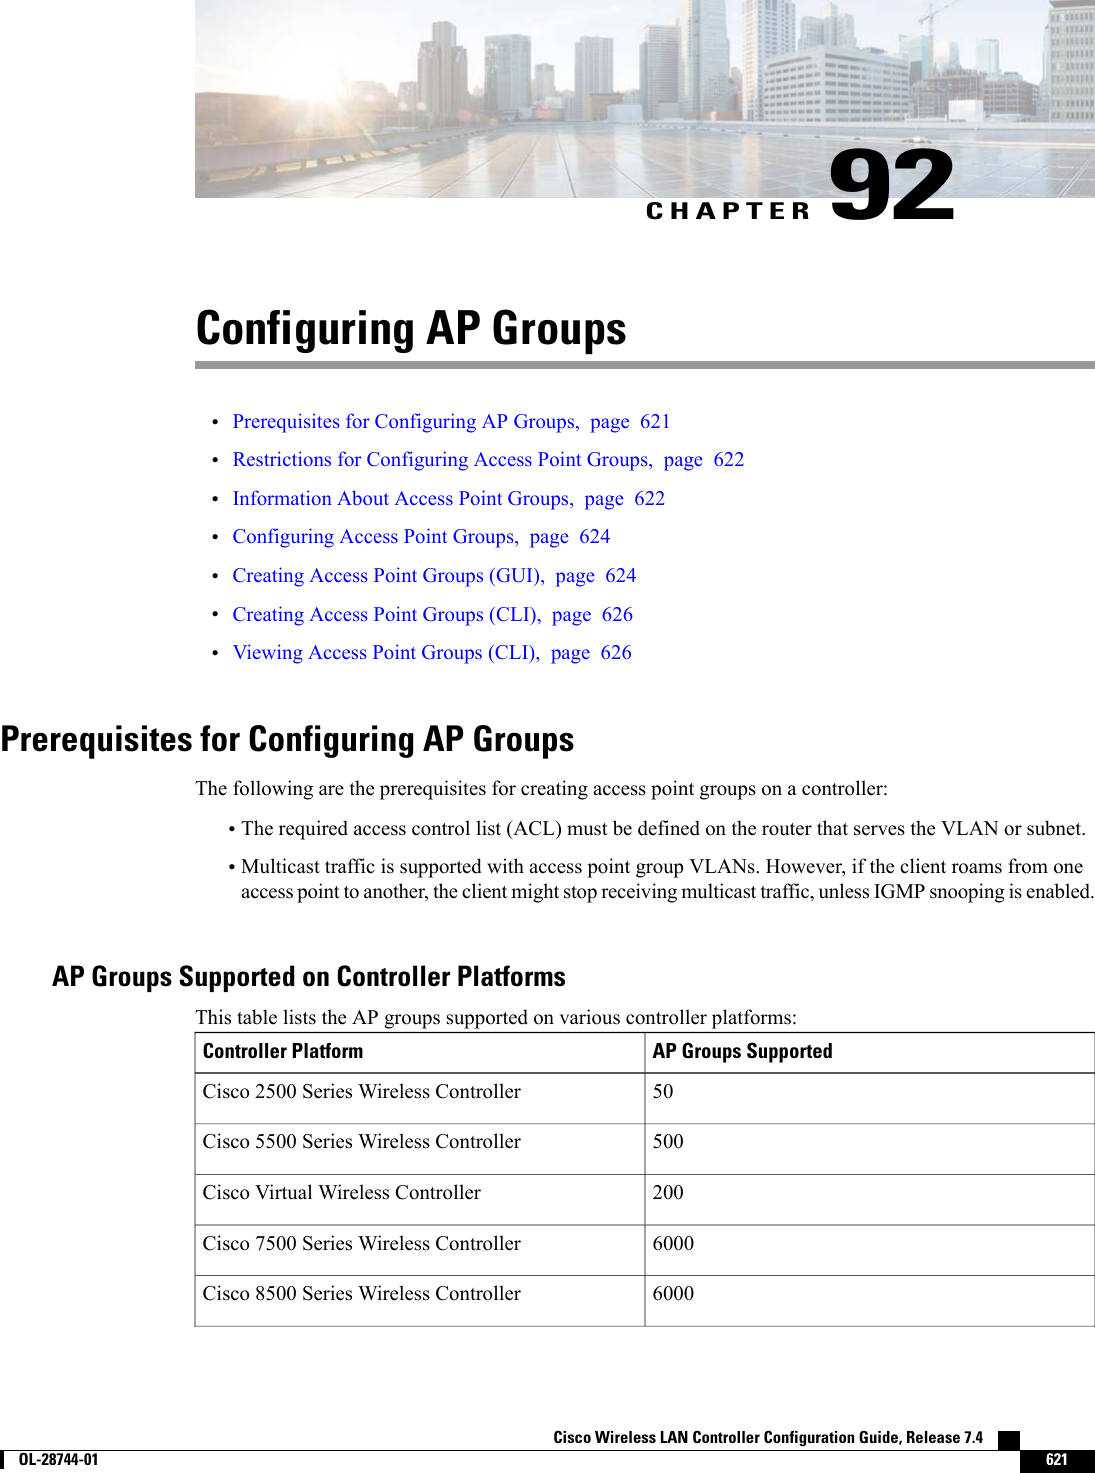 CHAPTER 92Configuring AP Groups•Prerequisites for Configuring AP Groups, page 621•Restrictions for Configuring Access Point Groups, page 622•Information About Access Point Groups, page 622•Configuring Access Point Groups, page 624•Creating Access Point Groups (GUI), page 624•Creating Access Point Groups (CLI), page 626•Viewing Access Point Groups (CLI), page 626Prerequisites for Configuring AP GroupsThe following are the prerequisites for creating access point groups on a controller:•The required access control list (ACL) must be defined on the router that serves the VLAN or subnet.•Multicast traffic is supported with access point group VLANs. However, if the client roams from oneaccess point to another, the client might stop receiving multicast traffic, unless IGMP snooping is enabled.AP Groups Supported on Controller PlatformsThis table lists the AP groups supported on various controller platforms:AP Groups SupportedController Platform50Cisco 2500 Series Wireless Controller500Cisco 5500 Series Wireless Controller200Cisco Virtual Wireless Controller6000Cisco 7500 Series Wireless Controller6000Cisco 8500 Series Wireless ControllerCisco Wireless LAN Controller Configuration Guide, Release 7.4        OL-28744-01 621